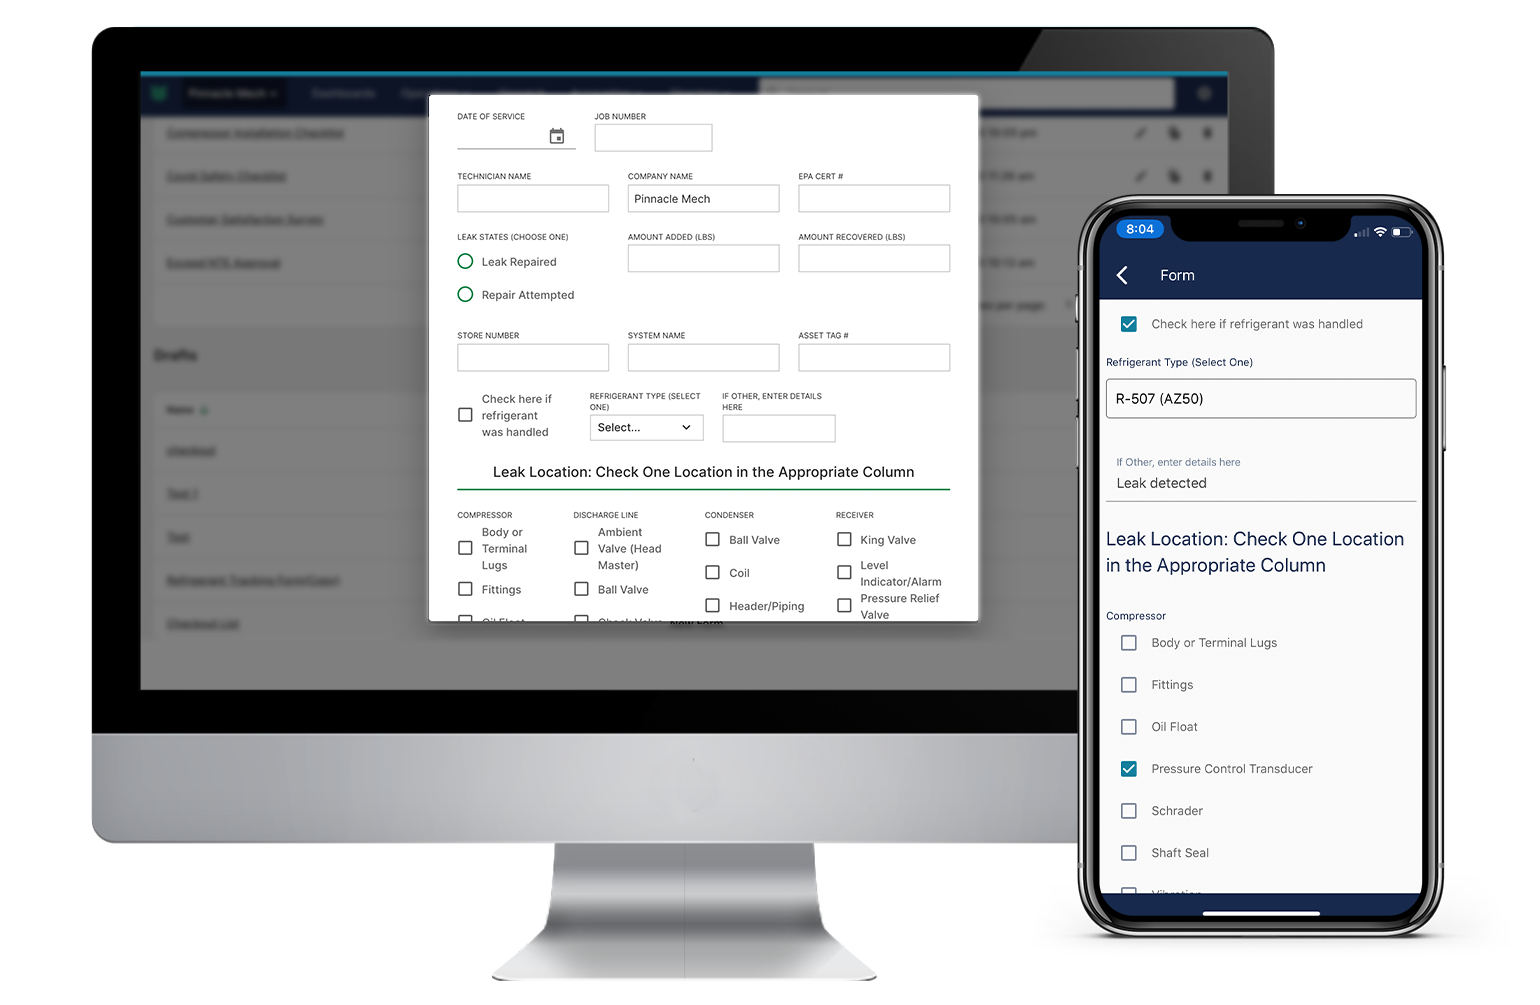 BuildOps Software - BuildOps Custom Forms: Create and customize forms, then attach to a job or assign to your technicians. Forms enforce quality, consistency, and proper documentation. And they can be used for anything you want, from COVID-19 Safety to Refrigerant Tracking.